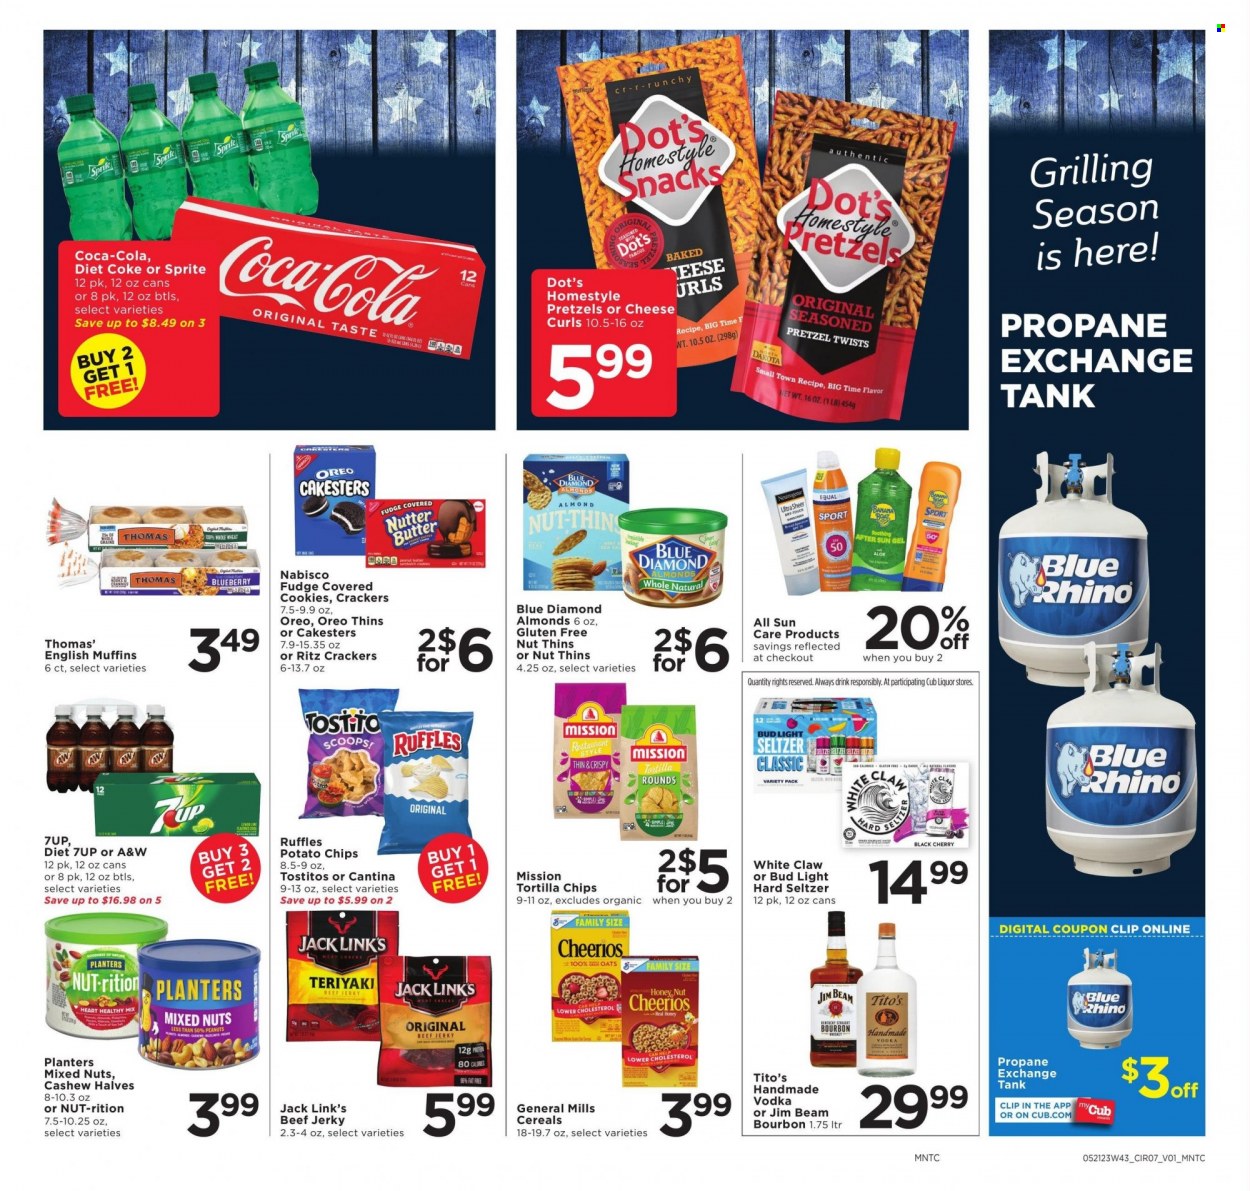 thumbnail - Cub Foods Flyer - 05/21/2023 - 05/27/2023 - Sales products - english muffins, pretzels, cherries, beef jerky, jerky, Oreo, cookies, fudge, snack, crackers, RITZ, Nabisco, tortilla chips, potato chips, chips, Thins, Ruffles, Tostitos, Jack Link's, cereals, Cheerios, almonds, peanuts, mixed nuts, Planters, Blue Diamond, Coca-Cola, Sprite, Diet Coke, soft drink, 7UP, A&W, Coke, sparkling water, bourbon, vodka, Jim Beam, White Claw, Hard Seltzer, beer, Bud Light, sun care. Page 12.